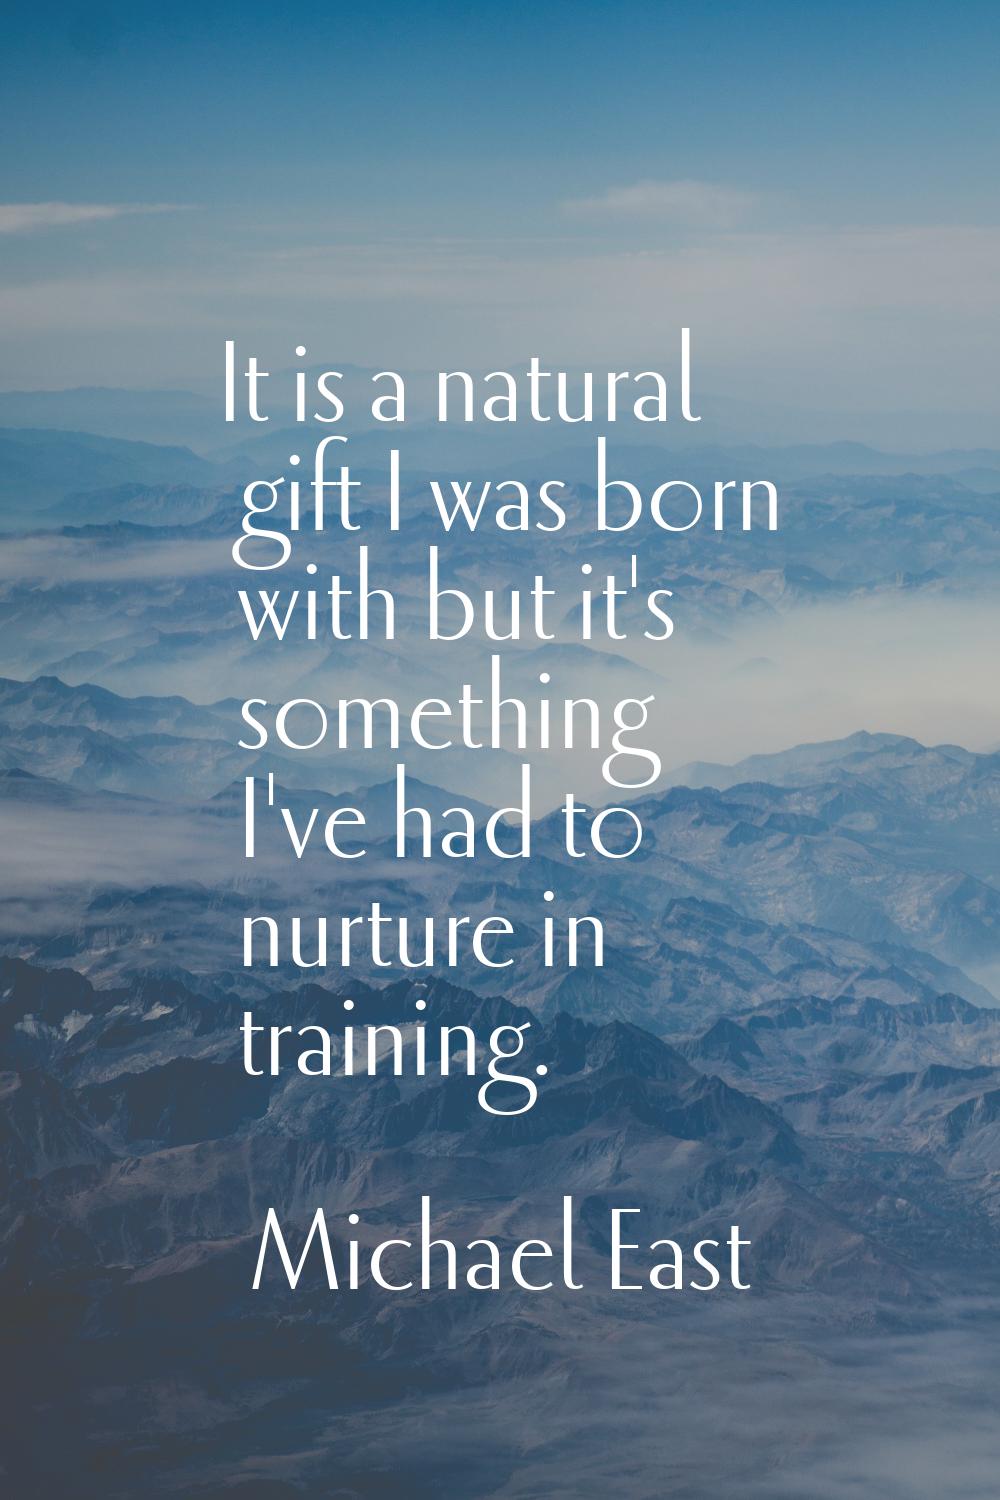 It is a natural gift I was born with but it's something I've had to nurture in training.